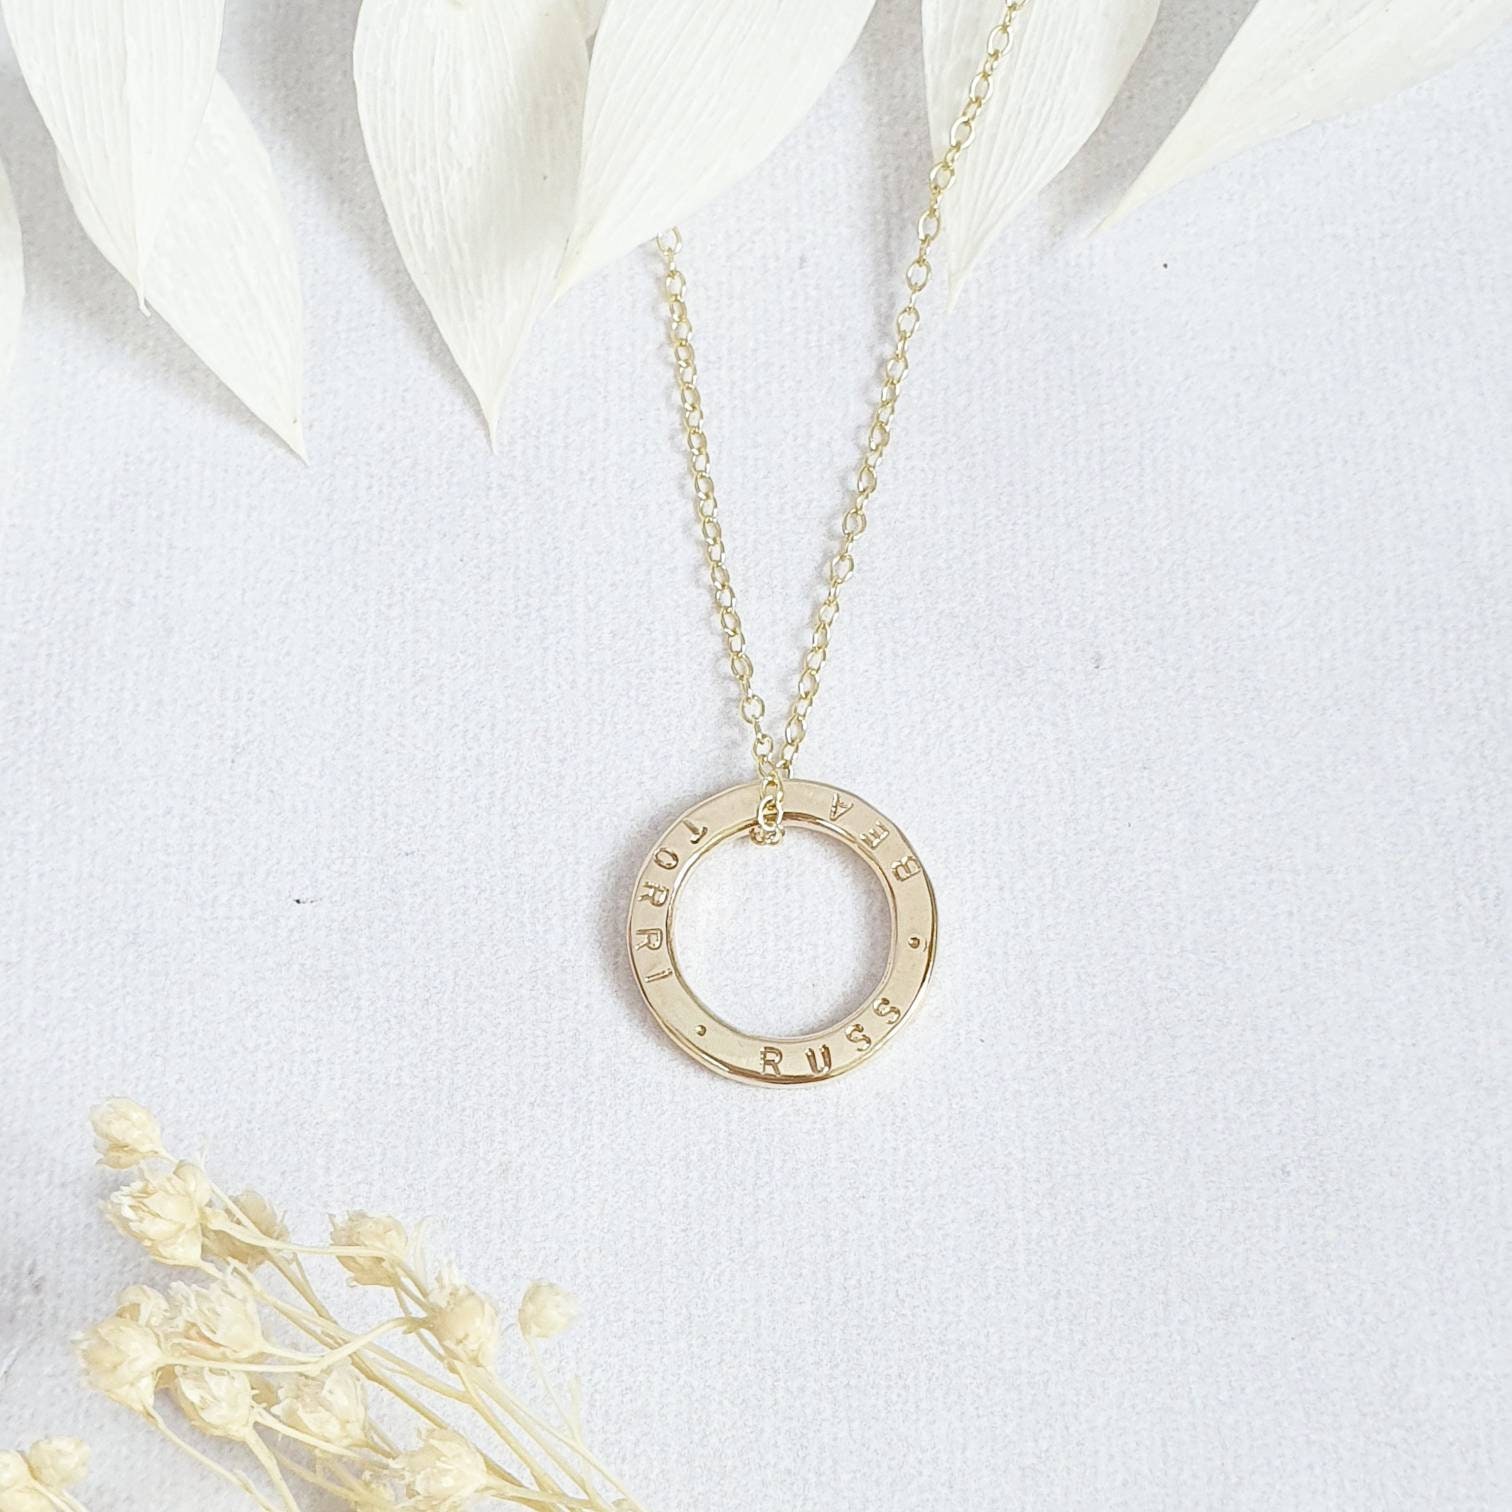 Personalised Thread Through Circle Necklace | Posh Totty Designs